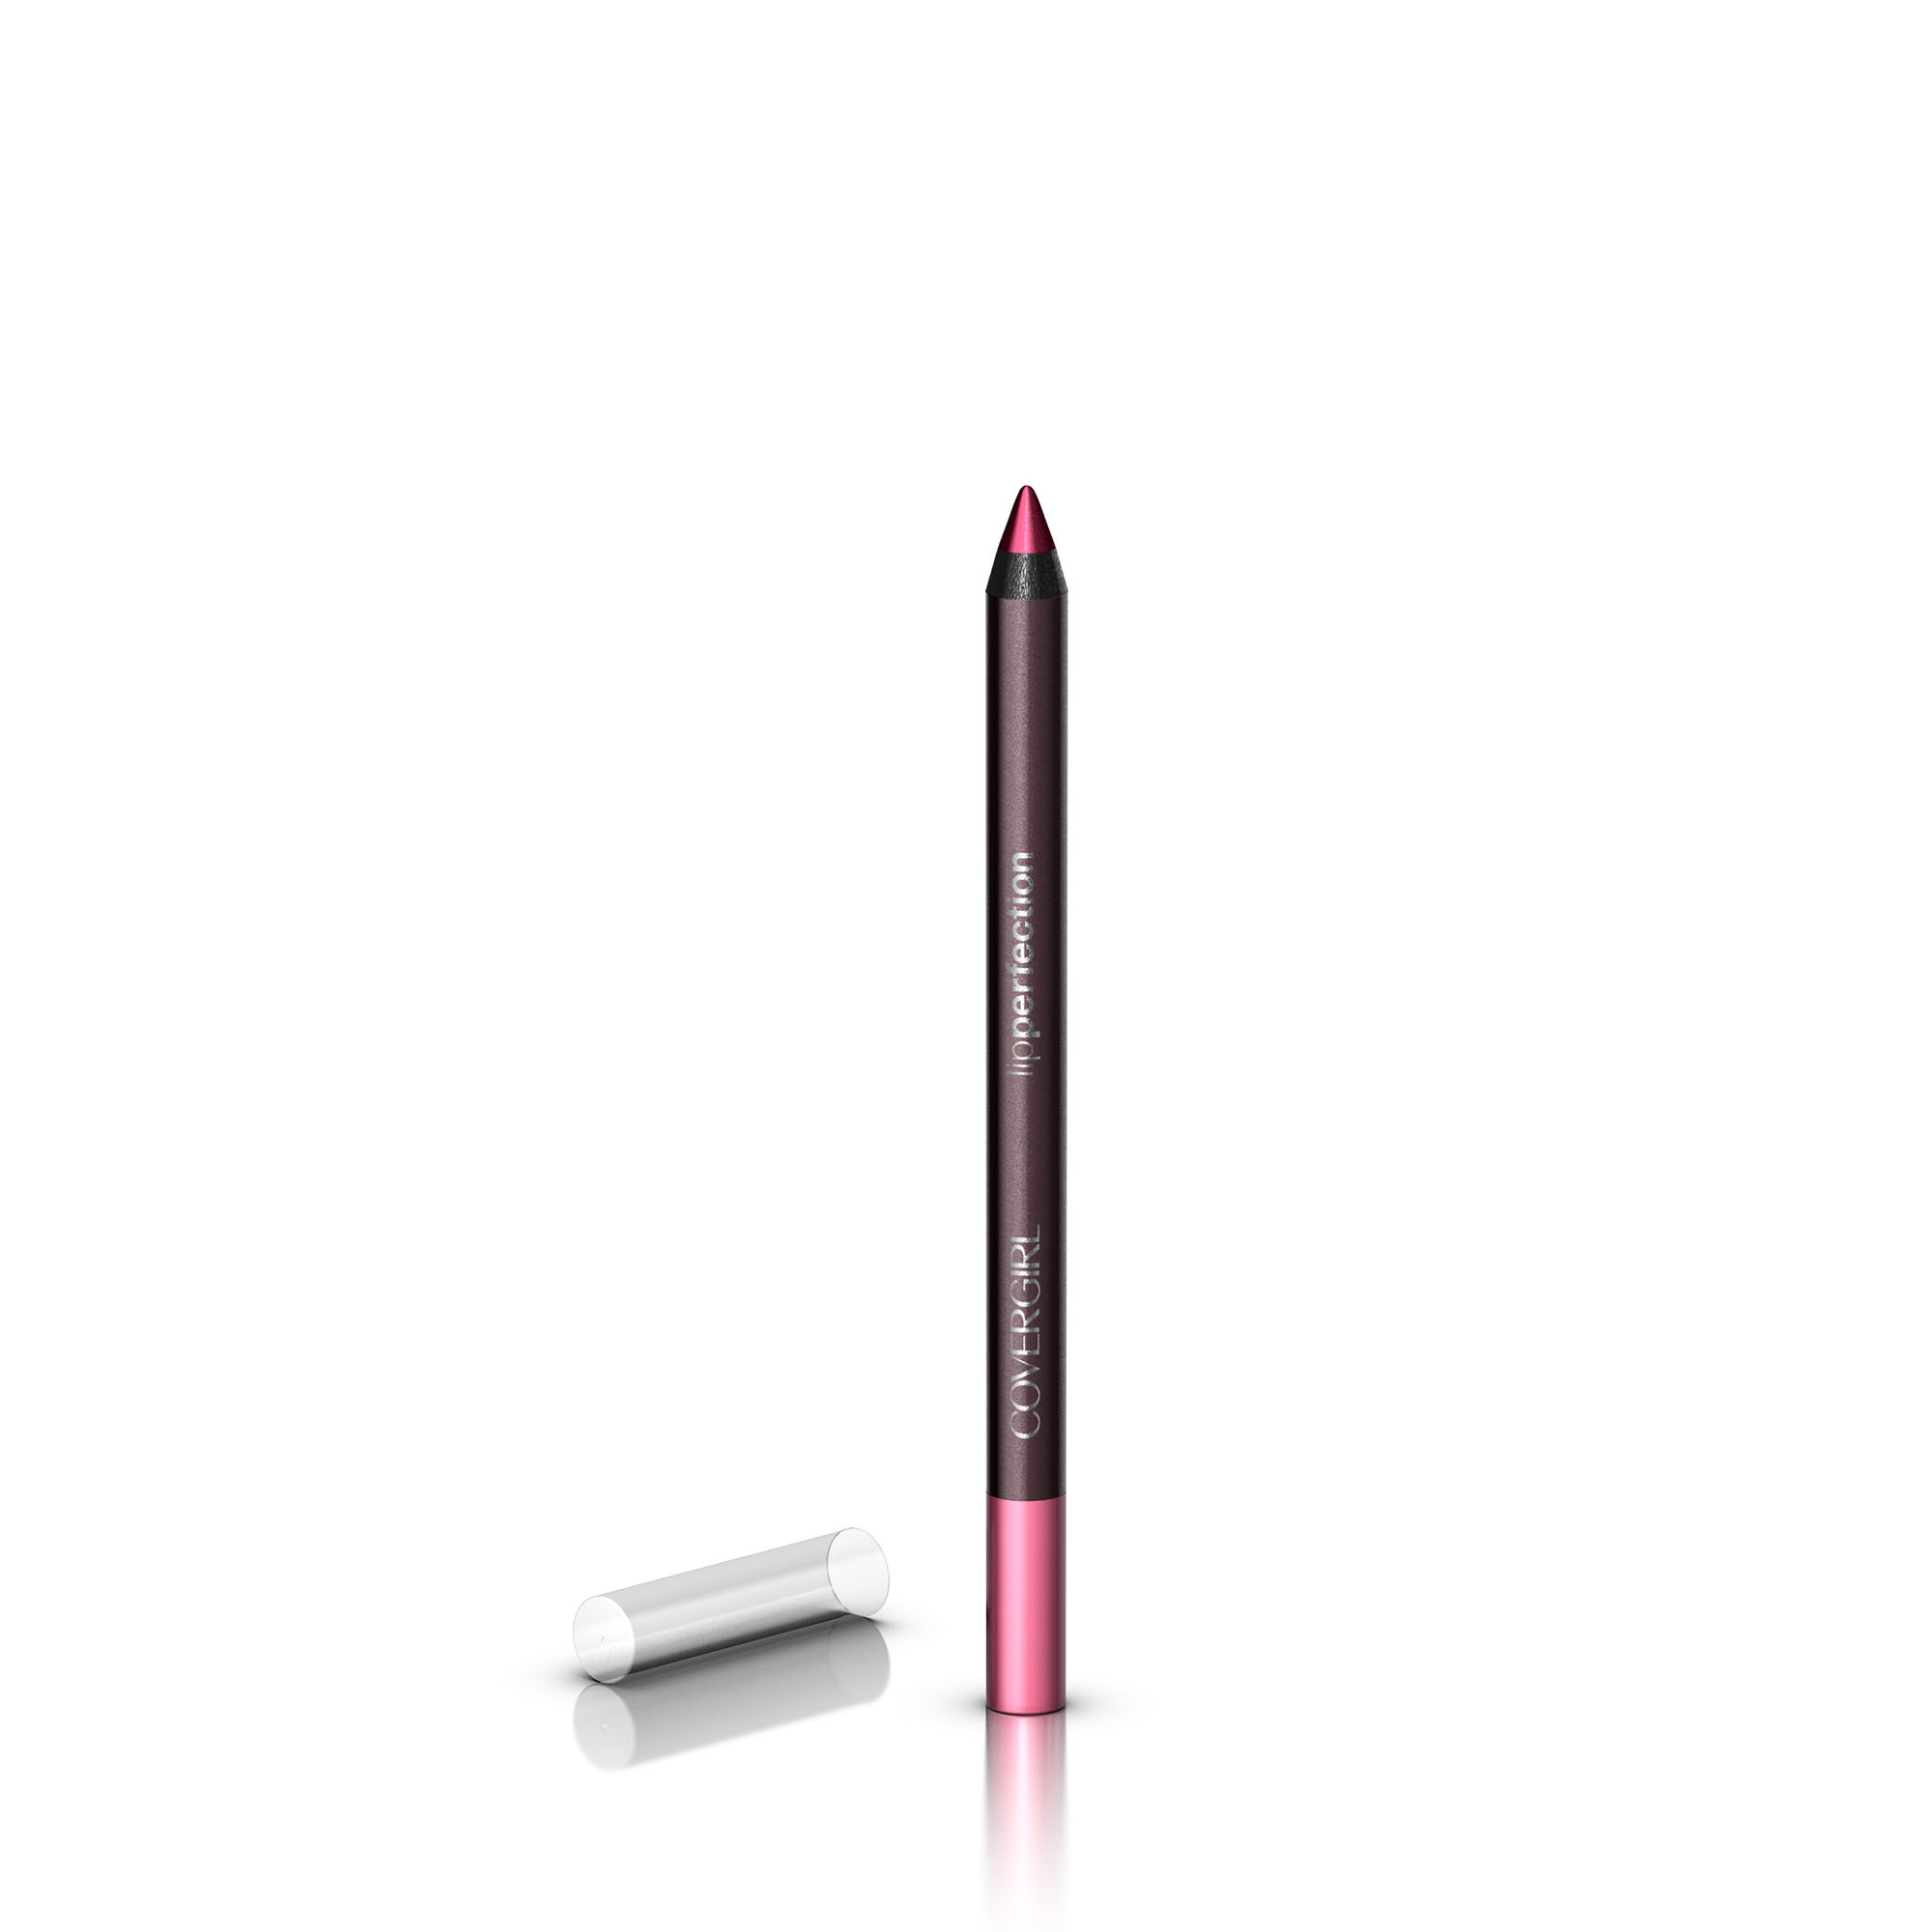 COVERGIRL Colorlicious Lip Perfection Lip Liner, Splendid - image 2 of 4